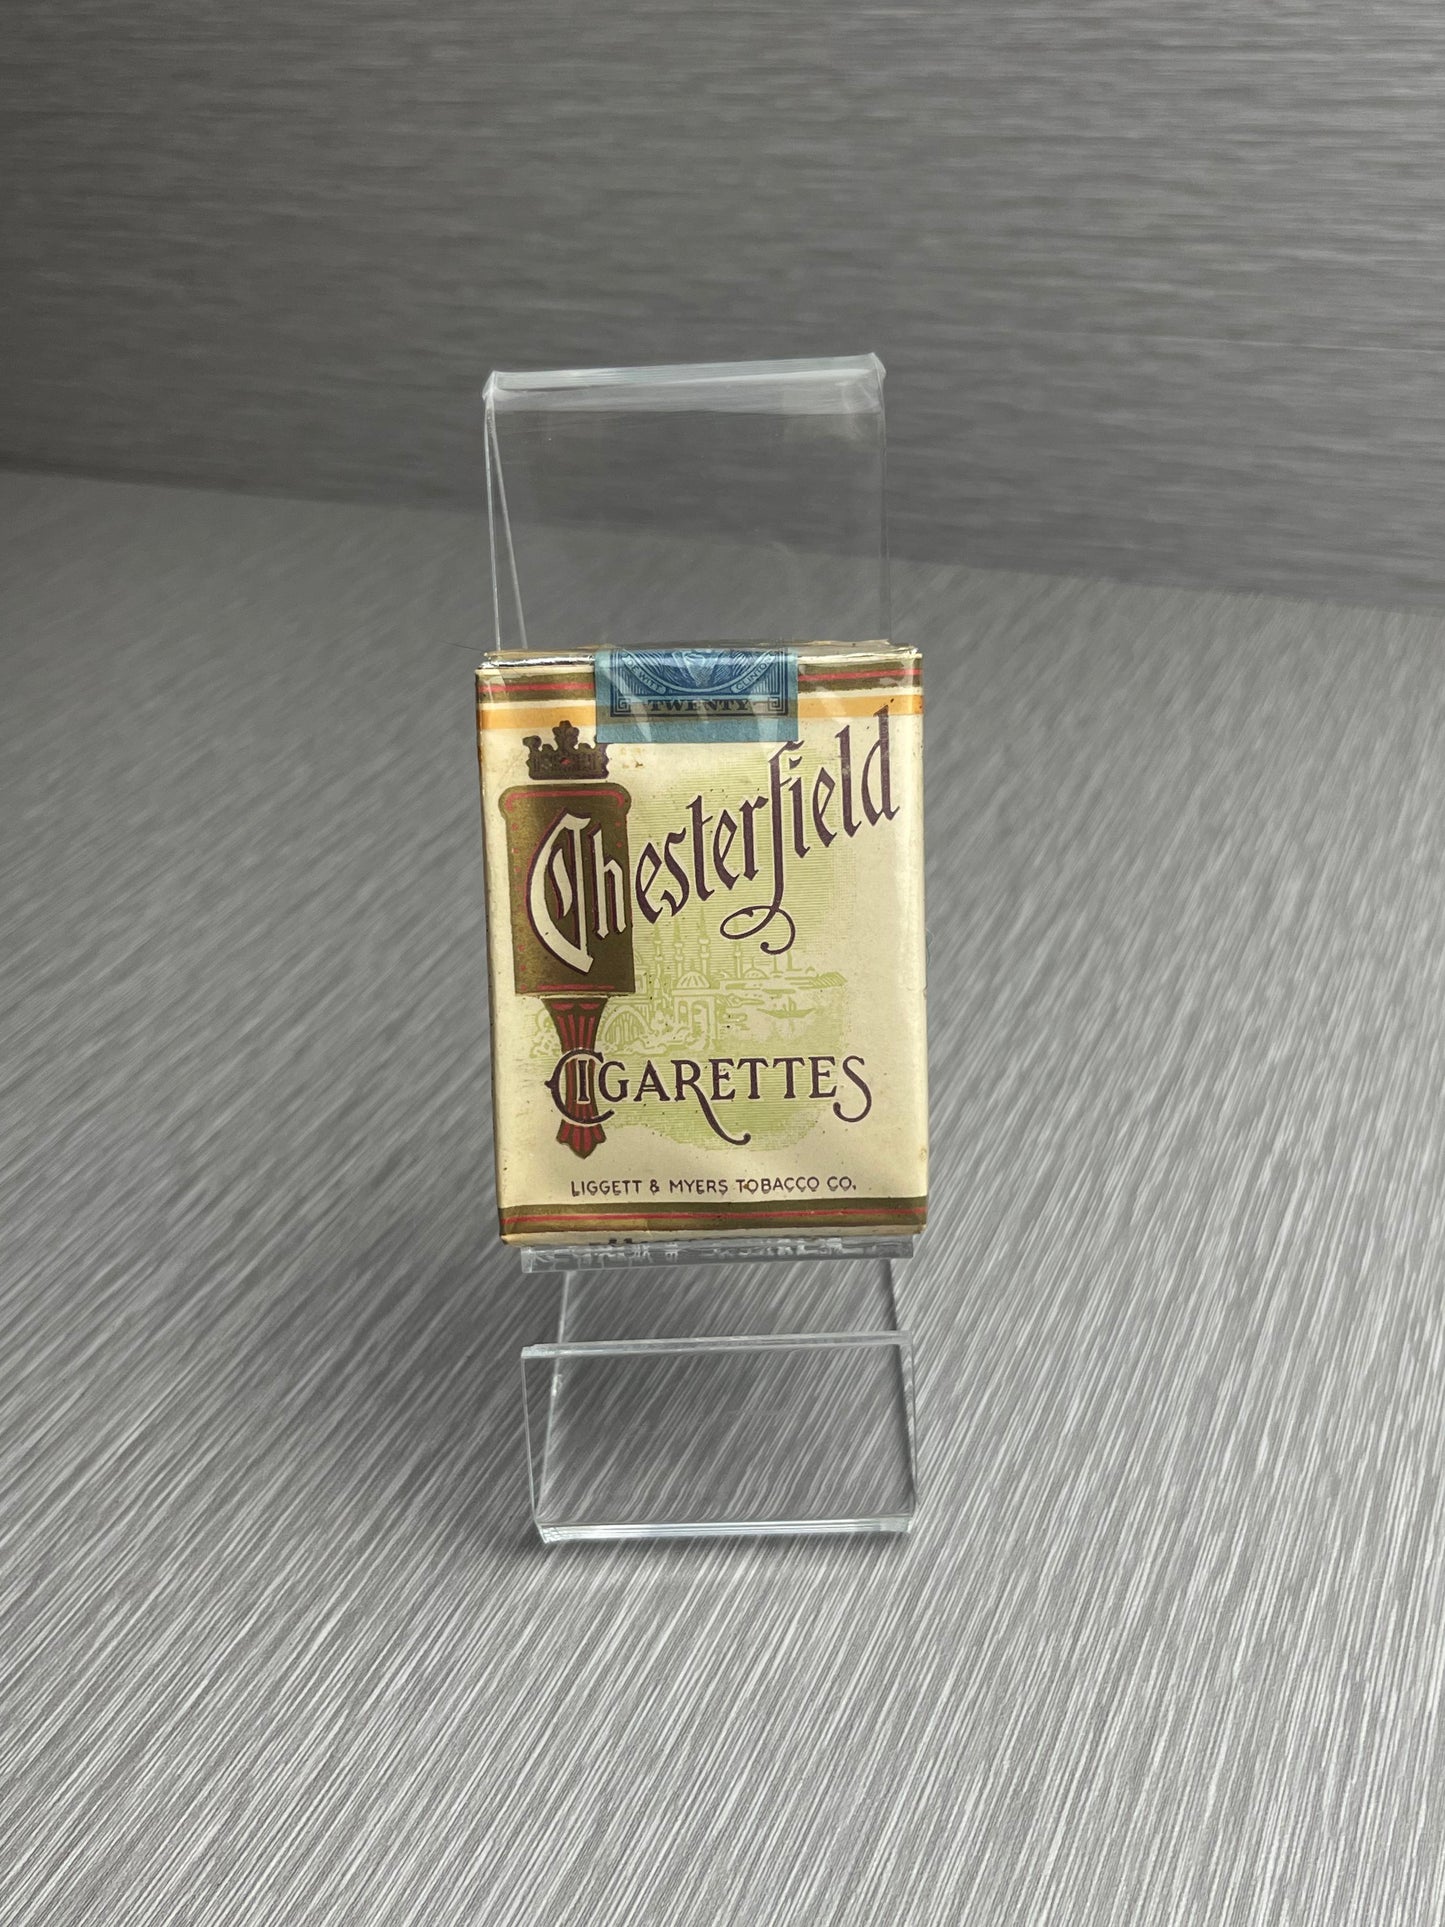 CHESTERFIELD 1947 UNOPENED & SEALED PACK OF 20 CIGARETTES SERIES 117